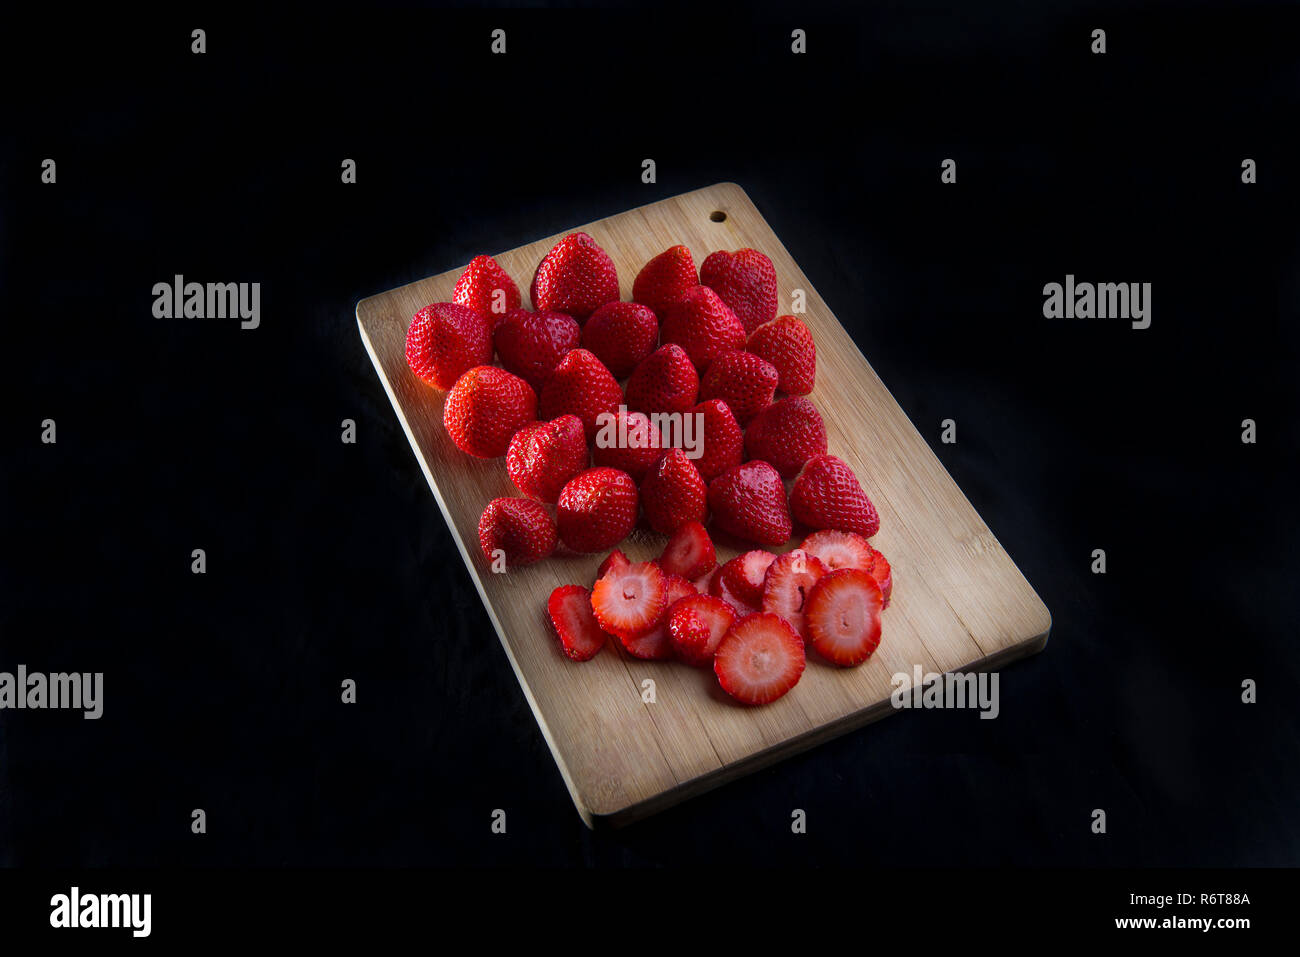 Strawberries on cutting board with black background for marketing purposes Stock Photo